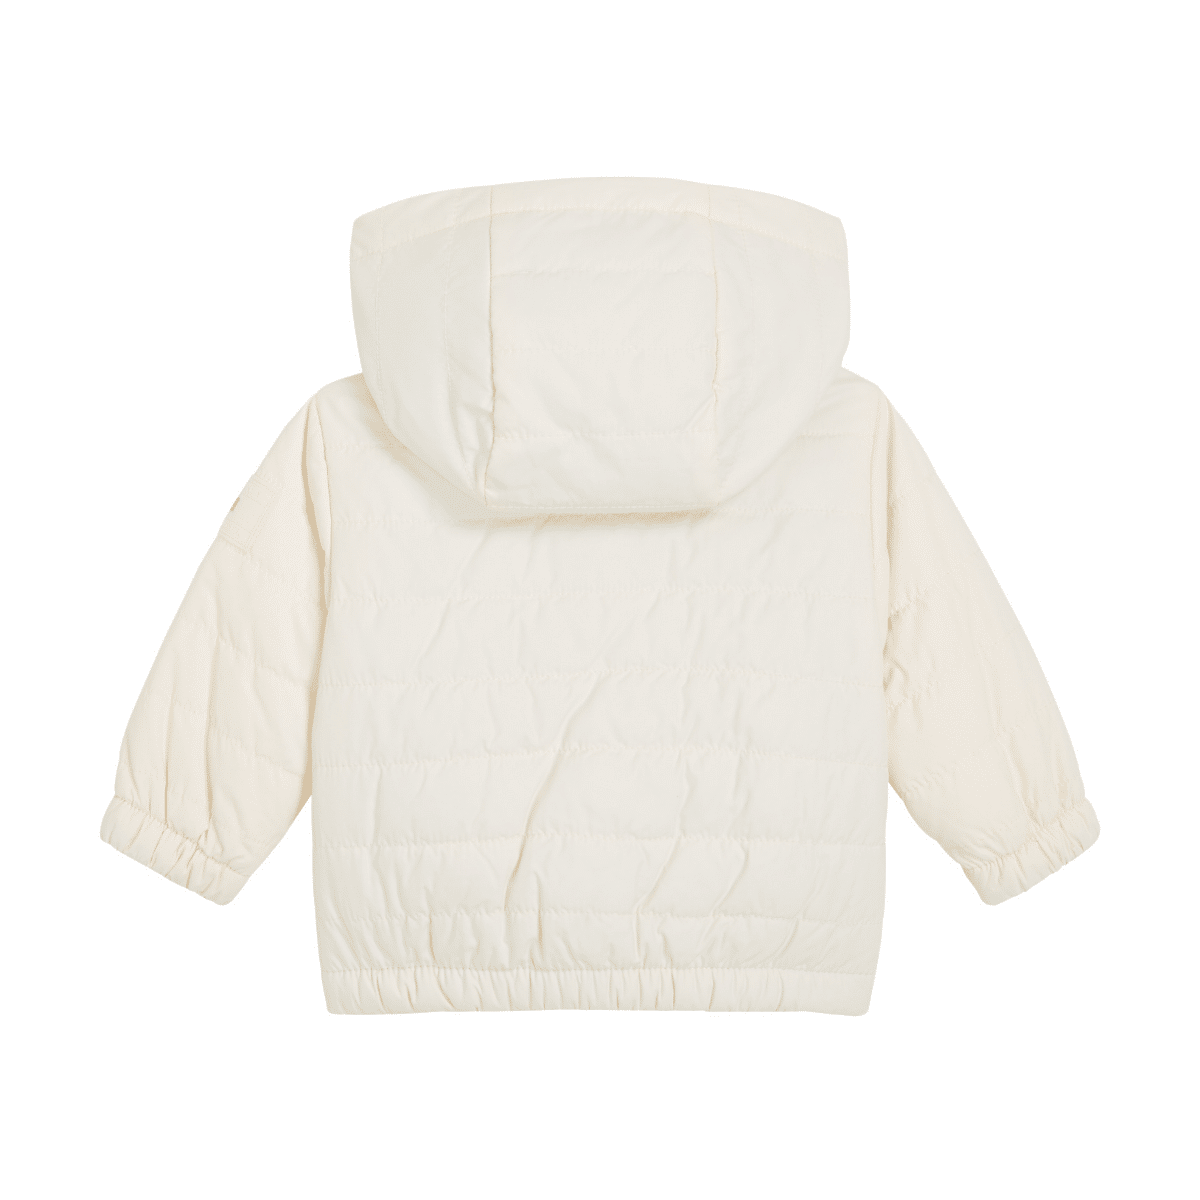 tommy hilfiger baby cream quilted jacket back view